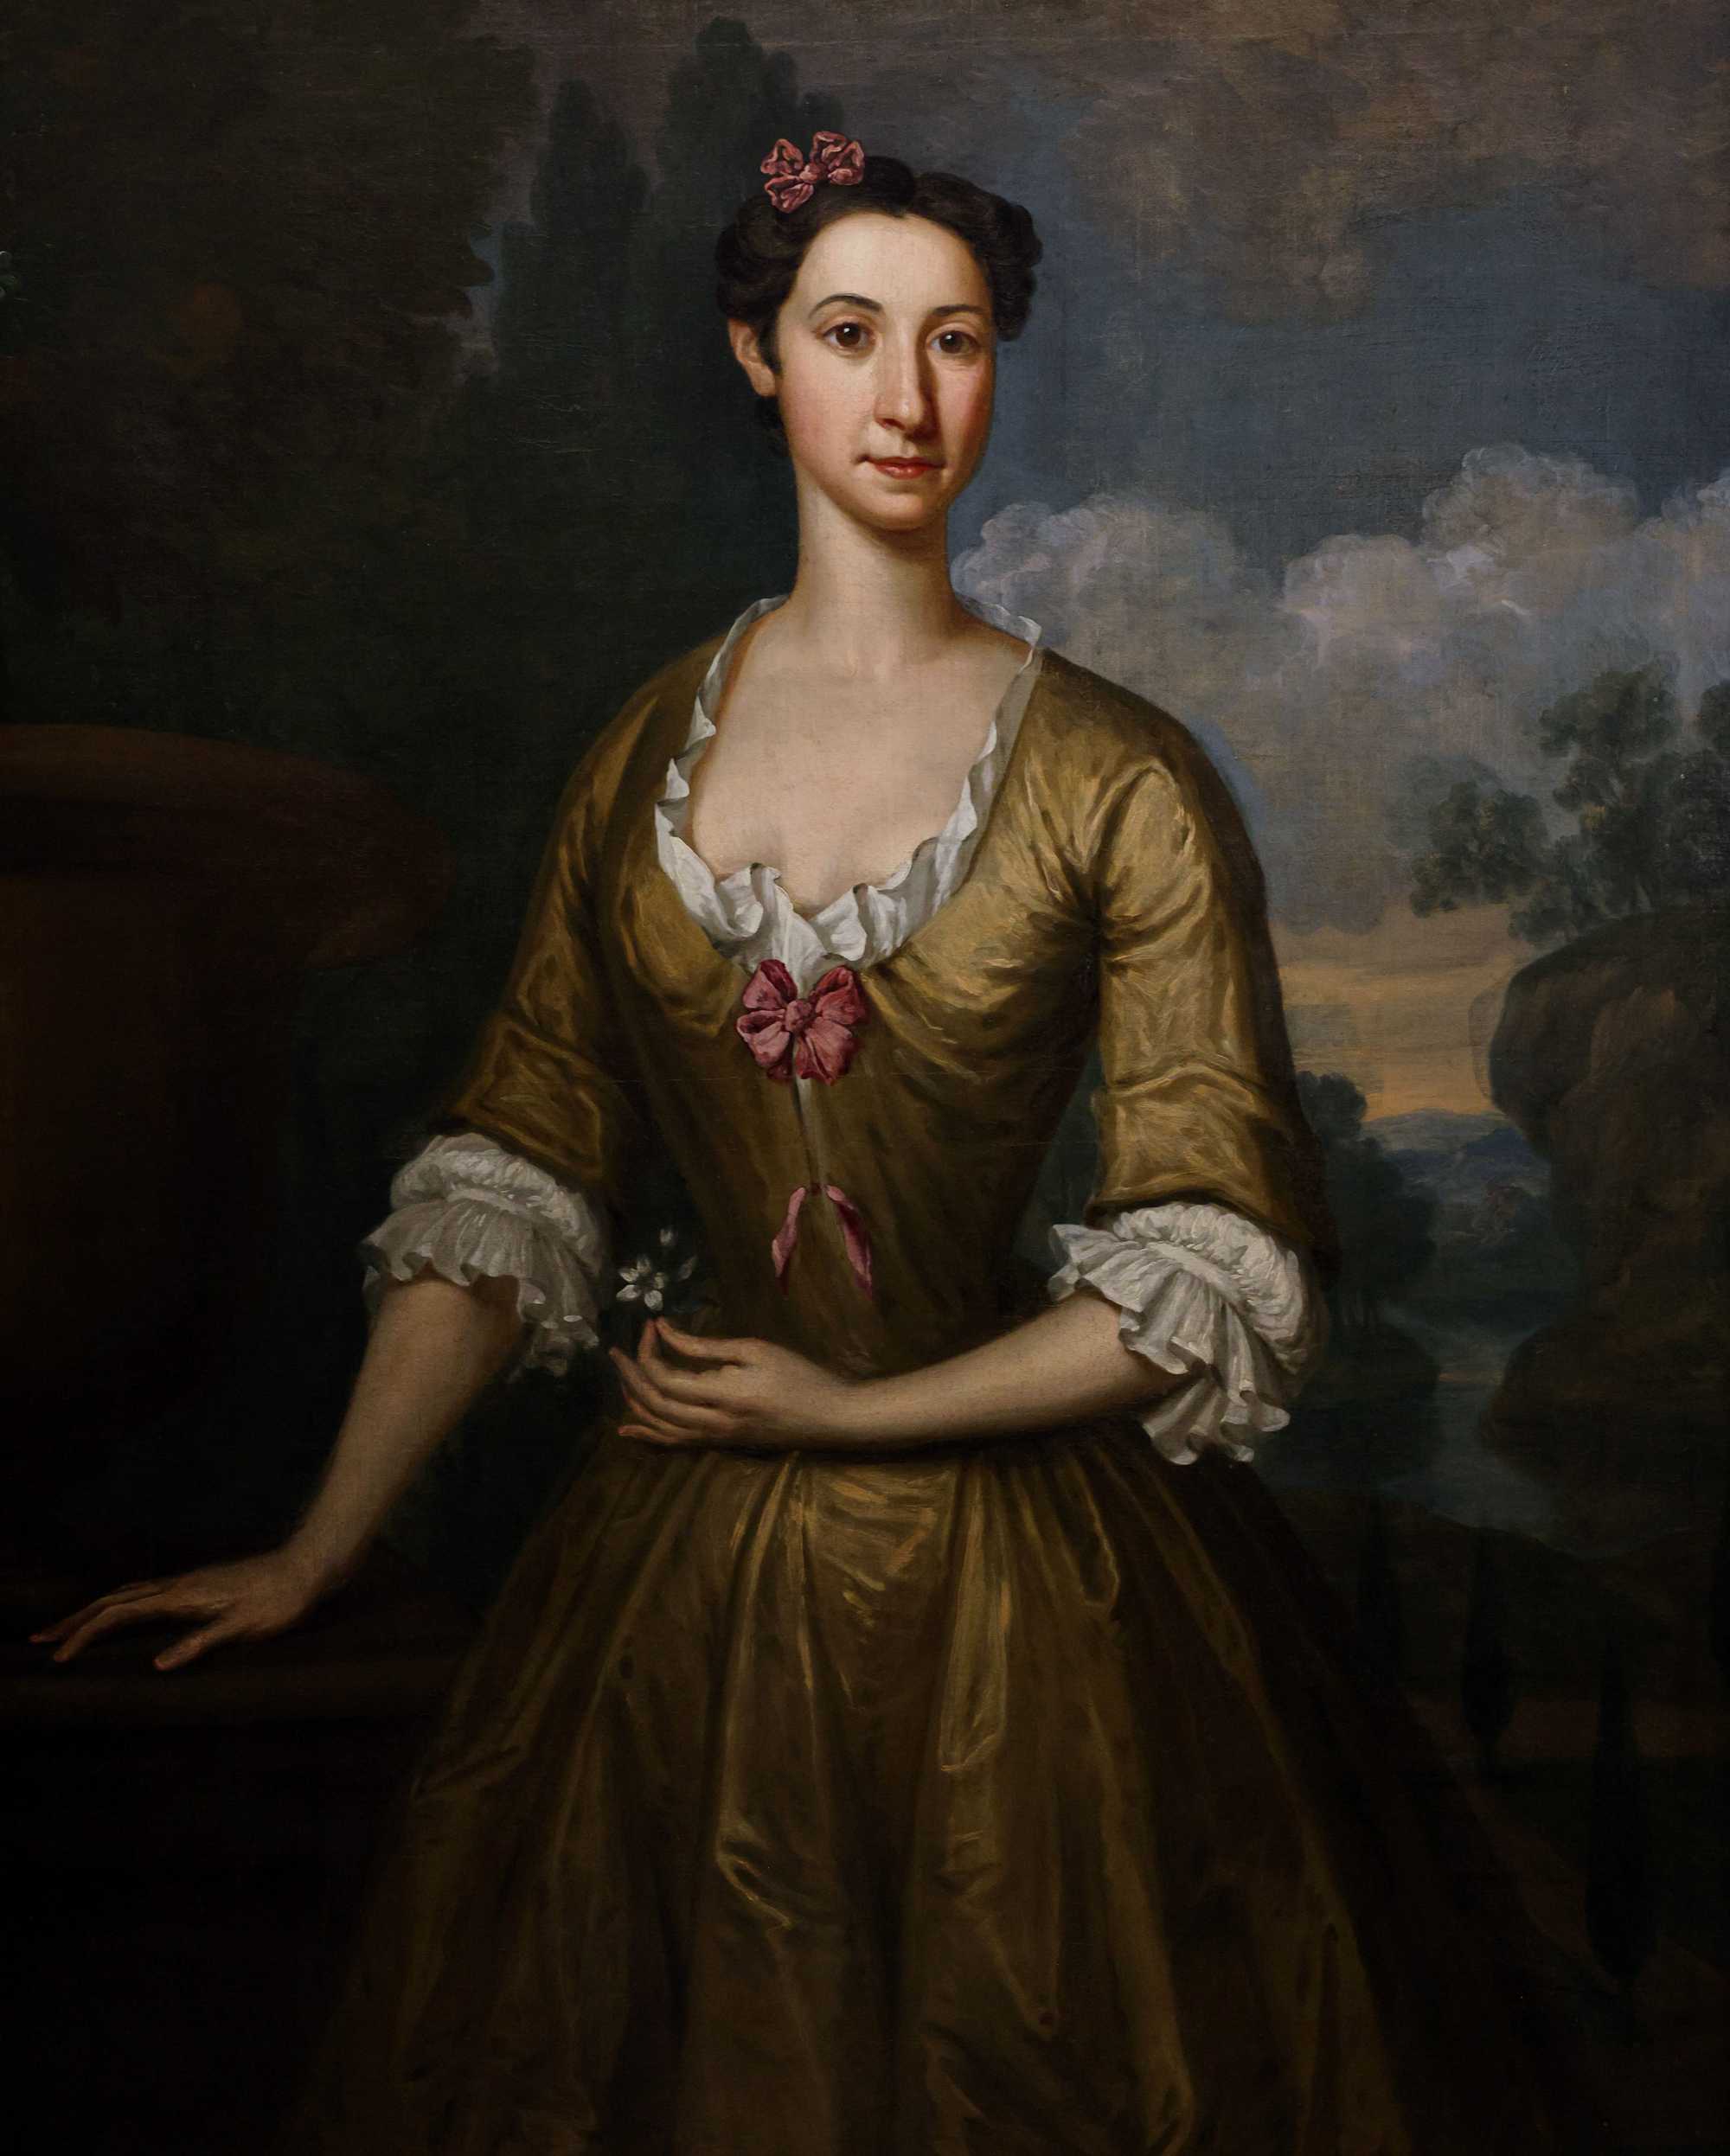 A portrait of Mary Ann (Faneuil) Jones, painted by John Smibert, is displayed in the stacks at the Massachusetts Historical Society in Boston.